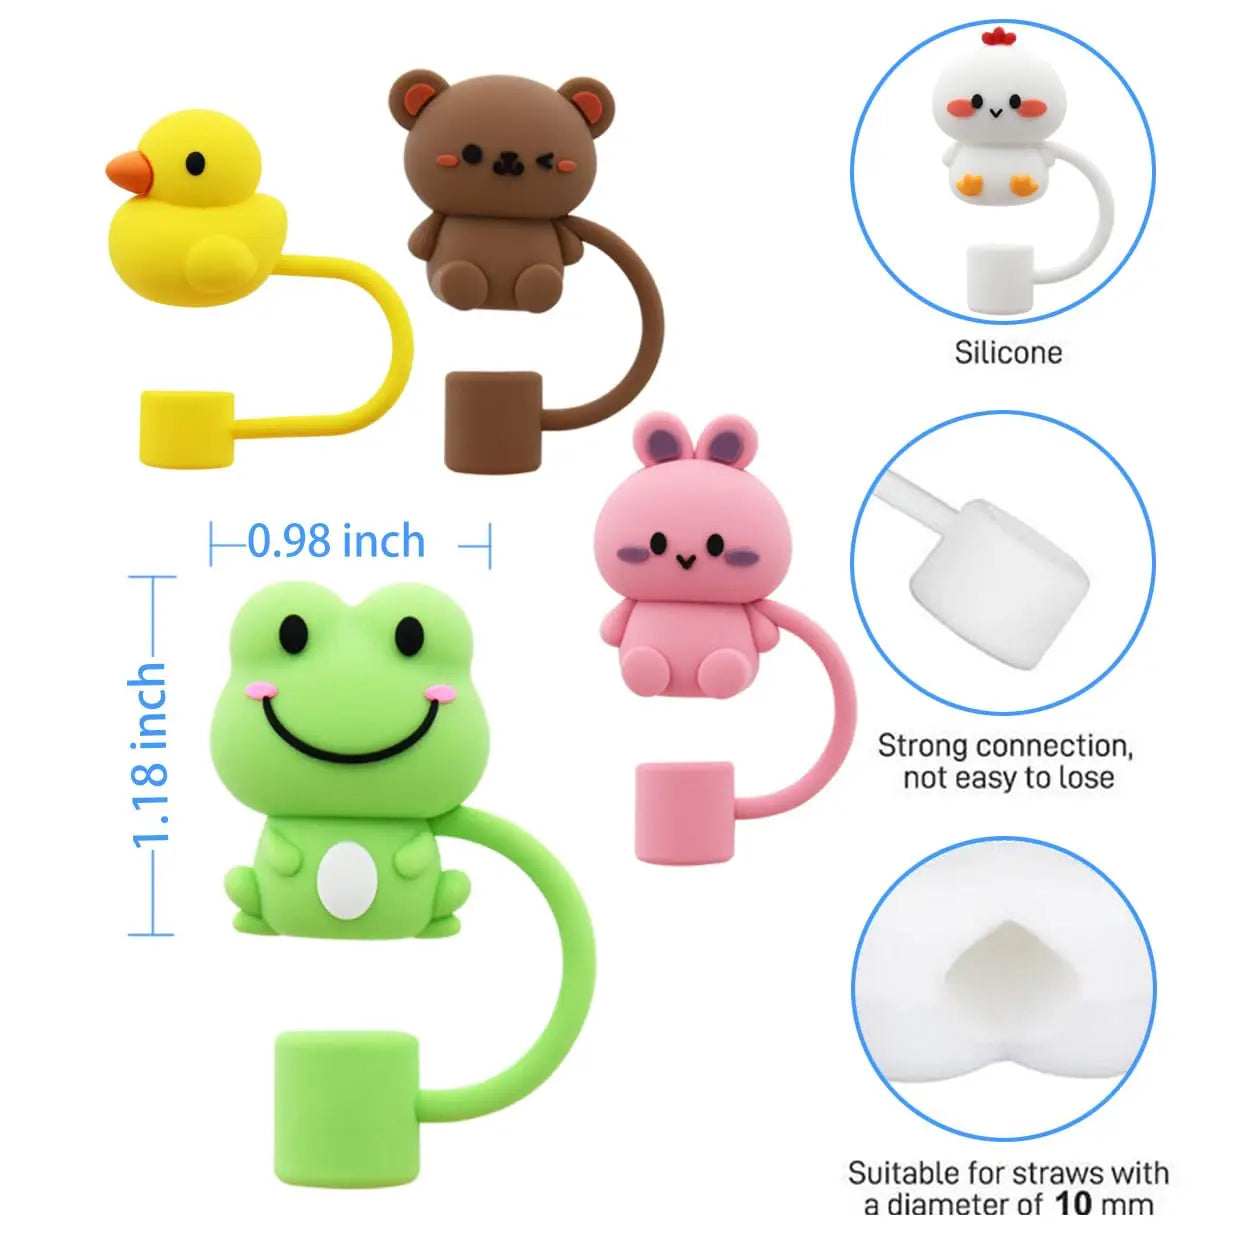 5Pcs Animal Shape Reusable10mm Silicone Straw Topper For Stanley Cup Accessories Dust-Proof Straw Cover Tips Lids